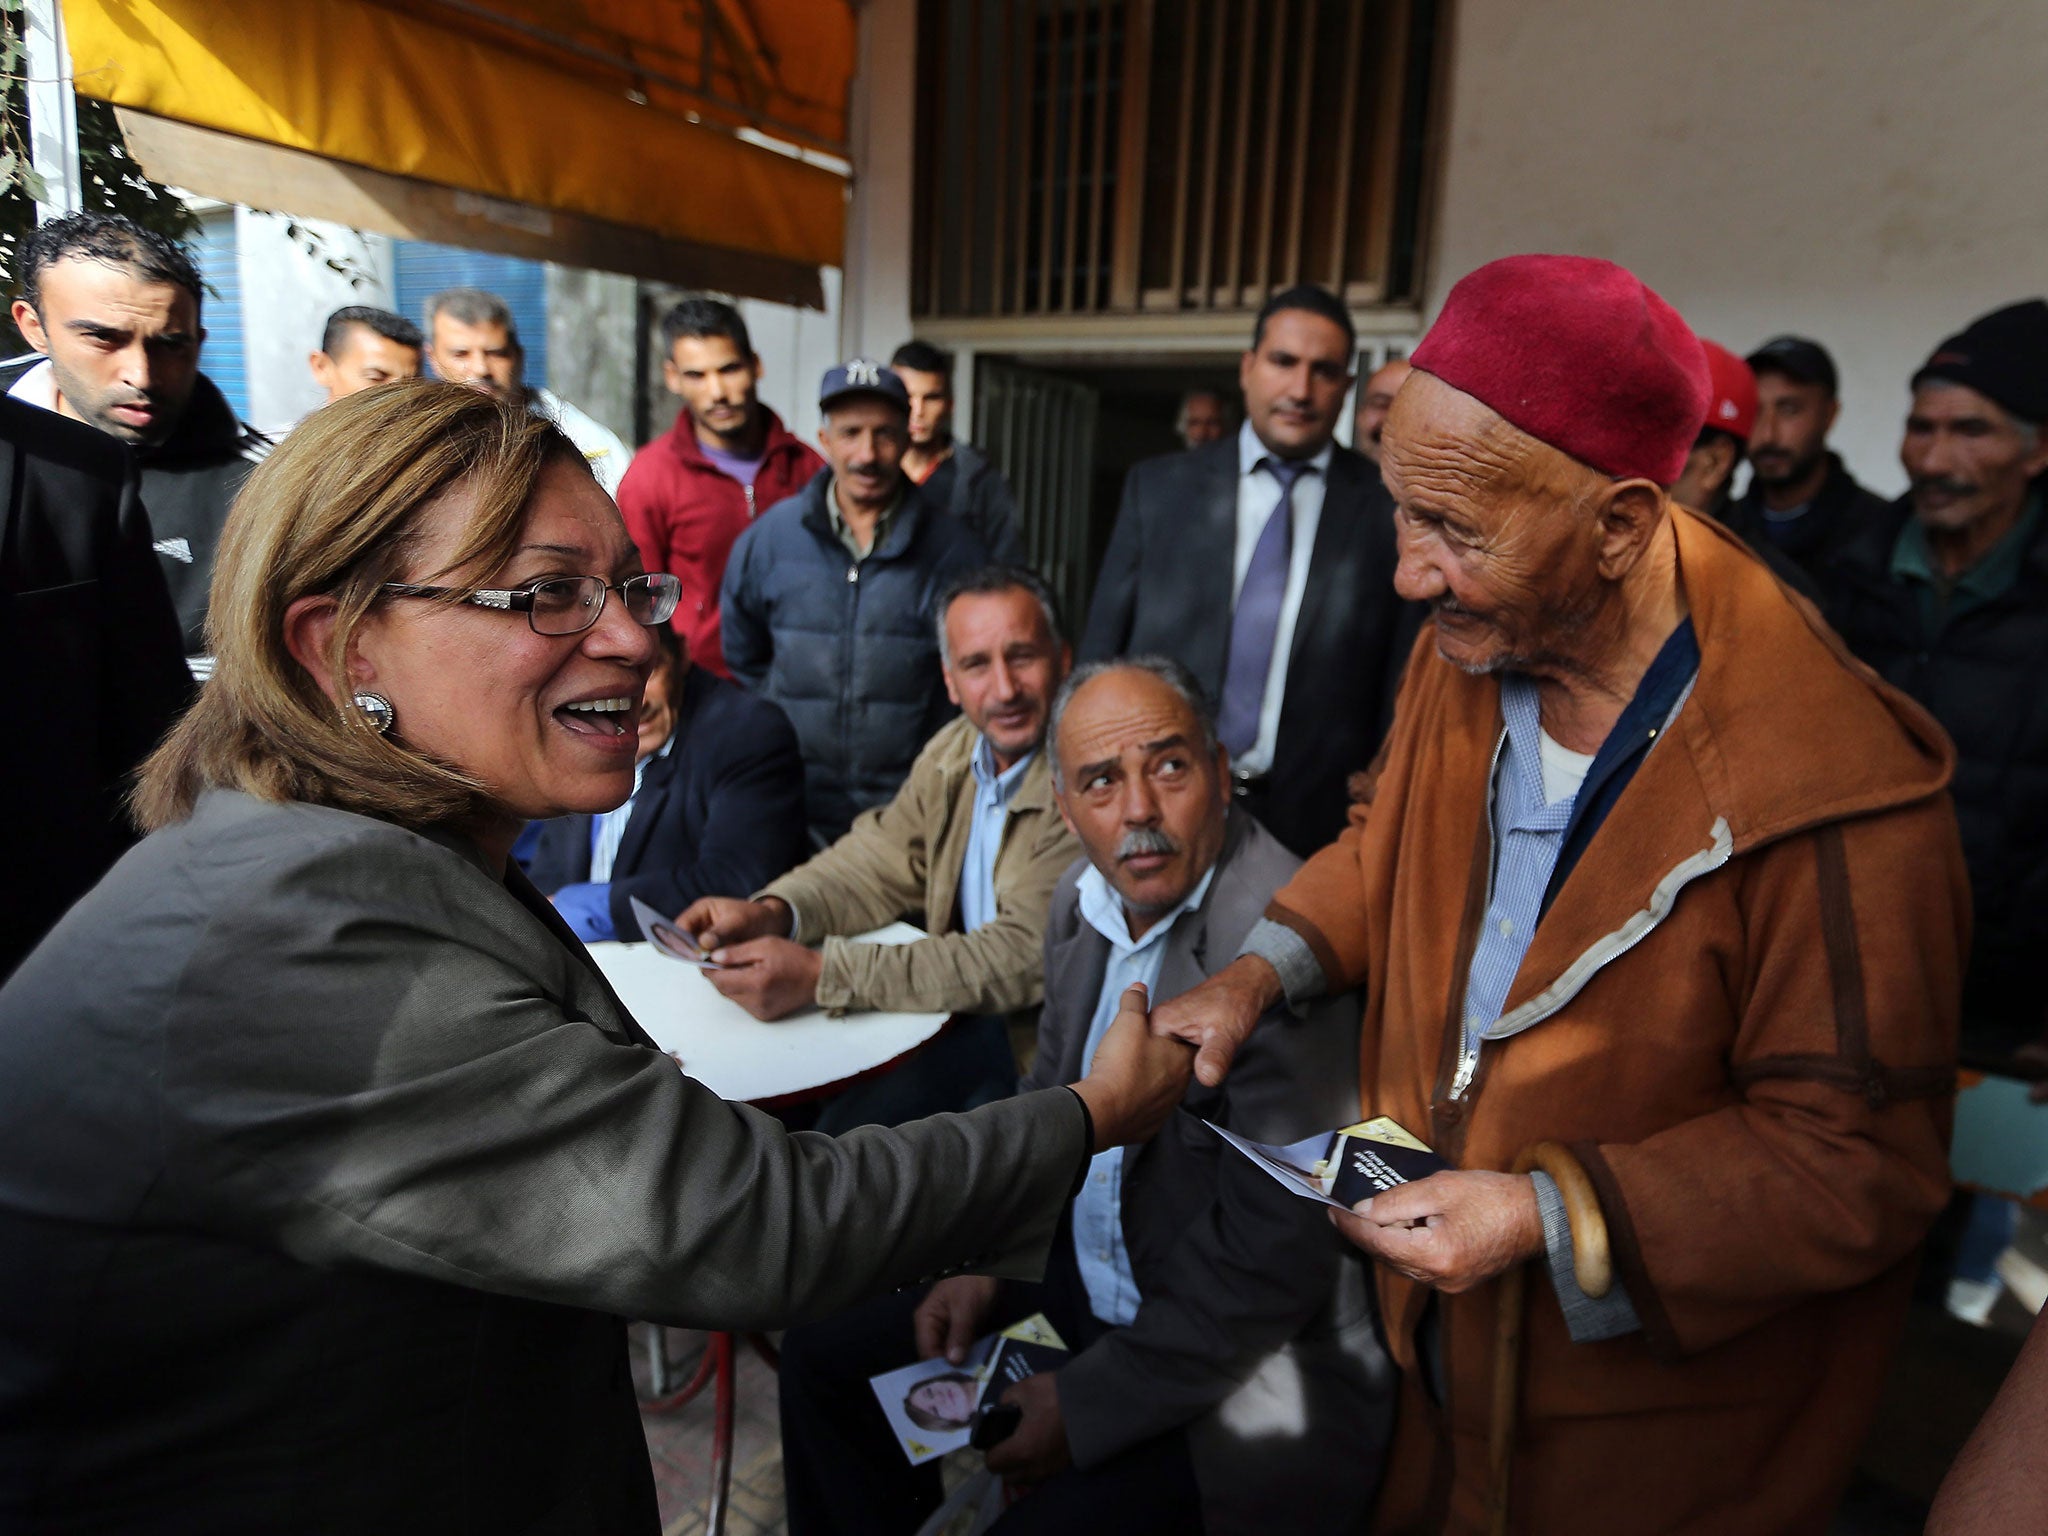 Kalthoum Kannou, a 55-year-old judge, on the campaign trail